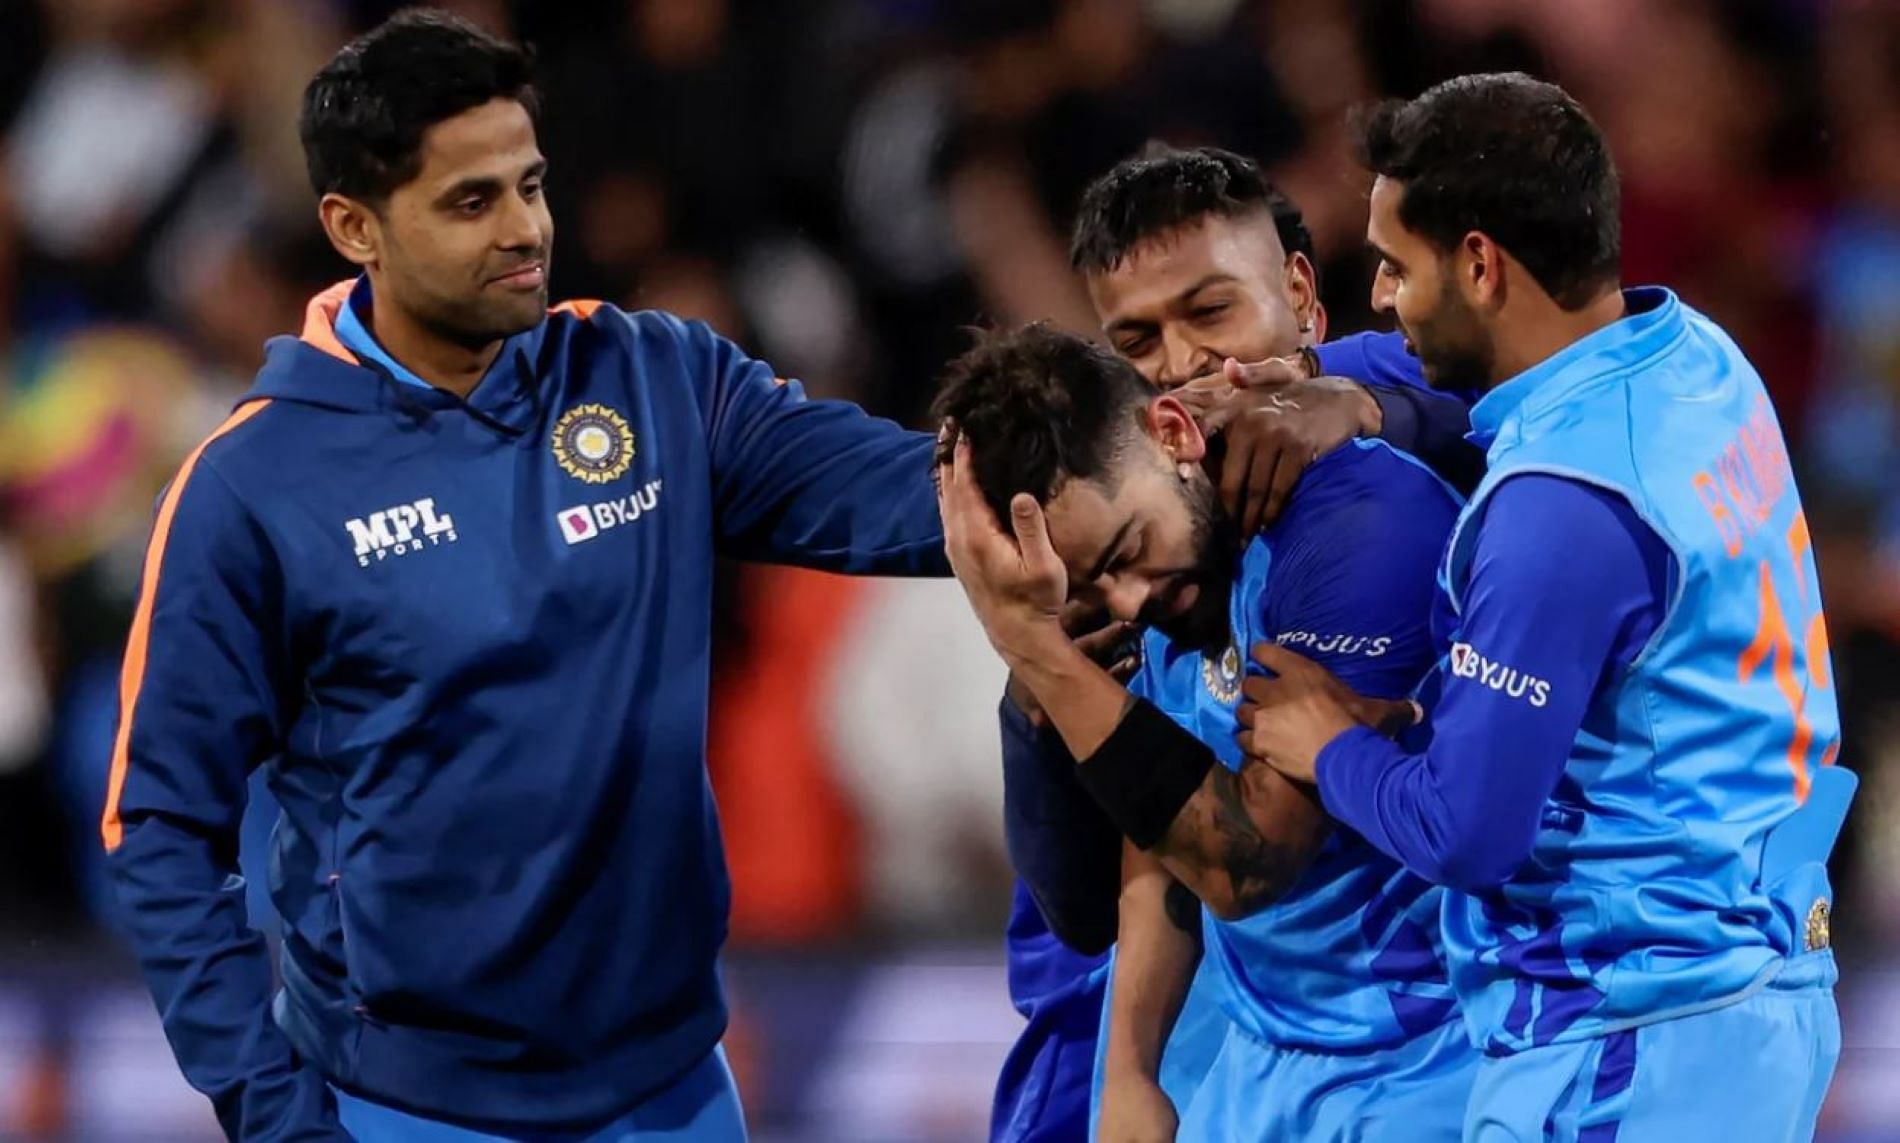 An emotional Kohli was mobbed by teammates after the win.